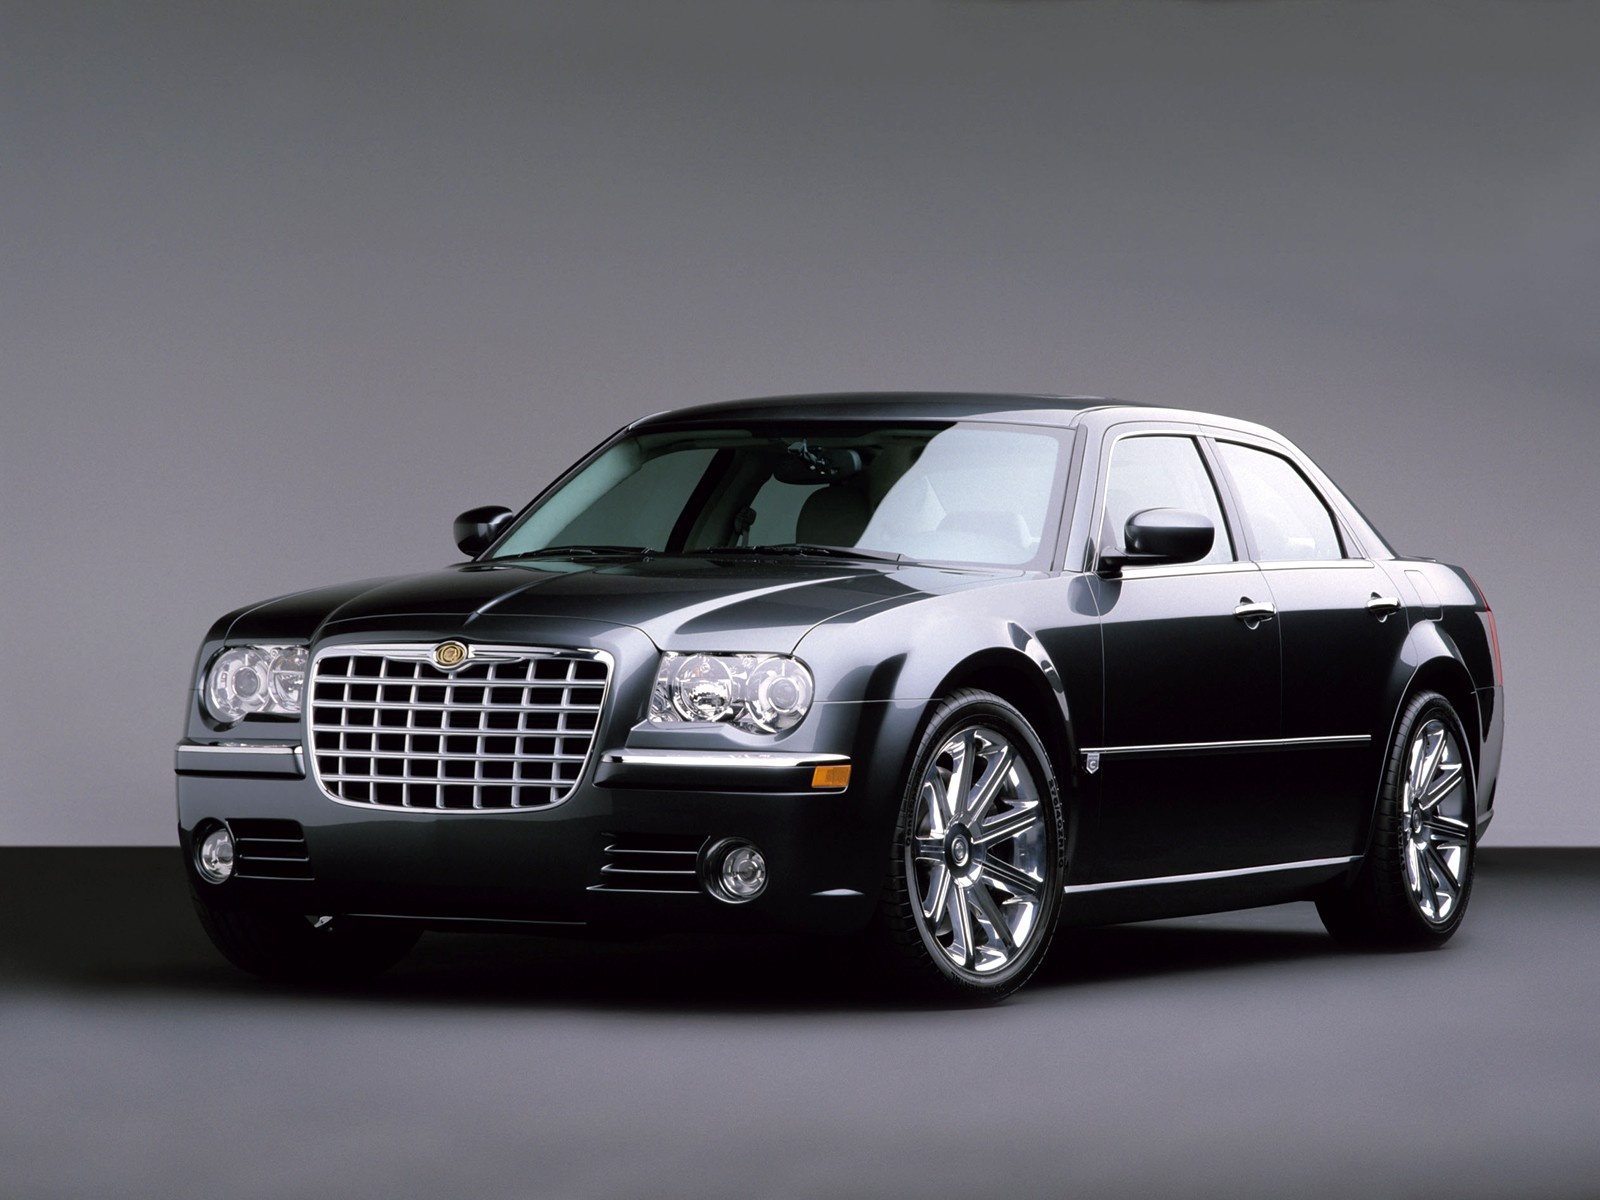 2008 Chrysler 300: Prices, Reviews & Pictures - CarGurus